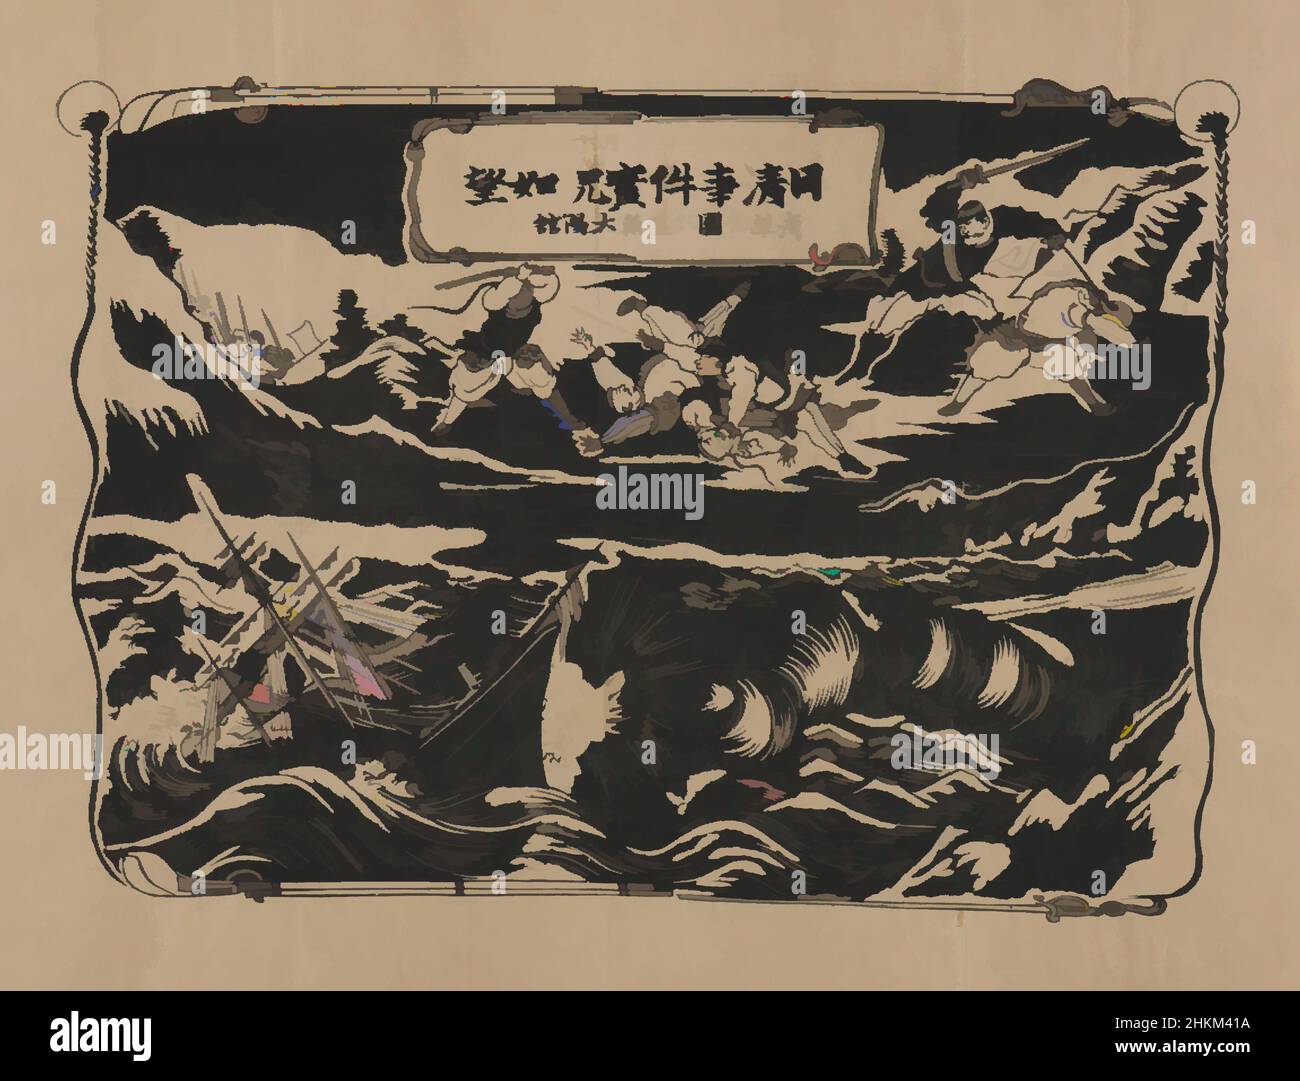 Art inspired by Poster for 'Viewing the True Circumstances of the Sino-Japanese Incident' at the Taiyôkan in the Corner of the Sixth District, Asakusa Park on September 15, 1894, Japanese, Meiji period, 1868–1912, 1894, Woodblock print, Made in Japan, Asia, Prints, sheet: 16 3/8 × 21 3/, Classic works modernized by Artotop with a splash of modernity. Shapes, color and value, eye-catching visual impact on art. Emotions through freedom of artworks in a contemporary way. A timeless message pursuing a wildly creative new direction. Artists turning to the digital medium and creating the Artotop NFT Stock Photo